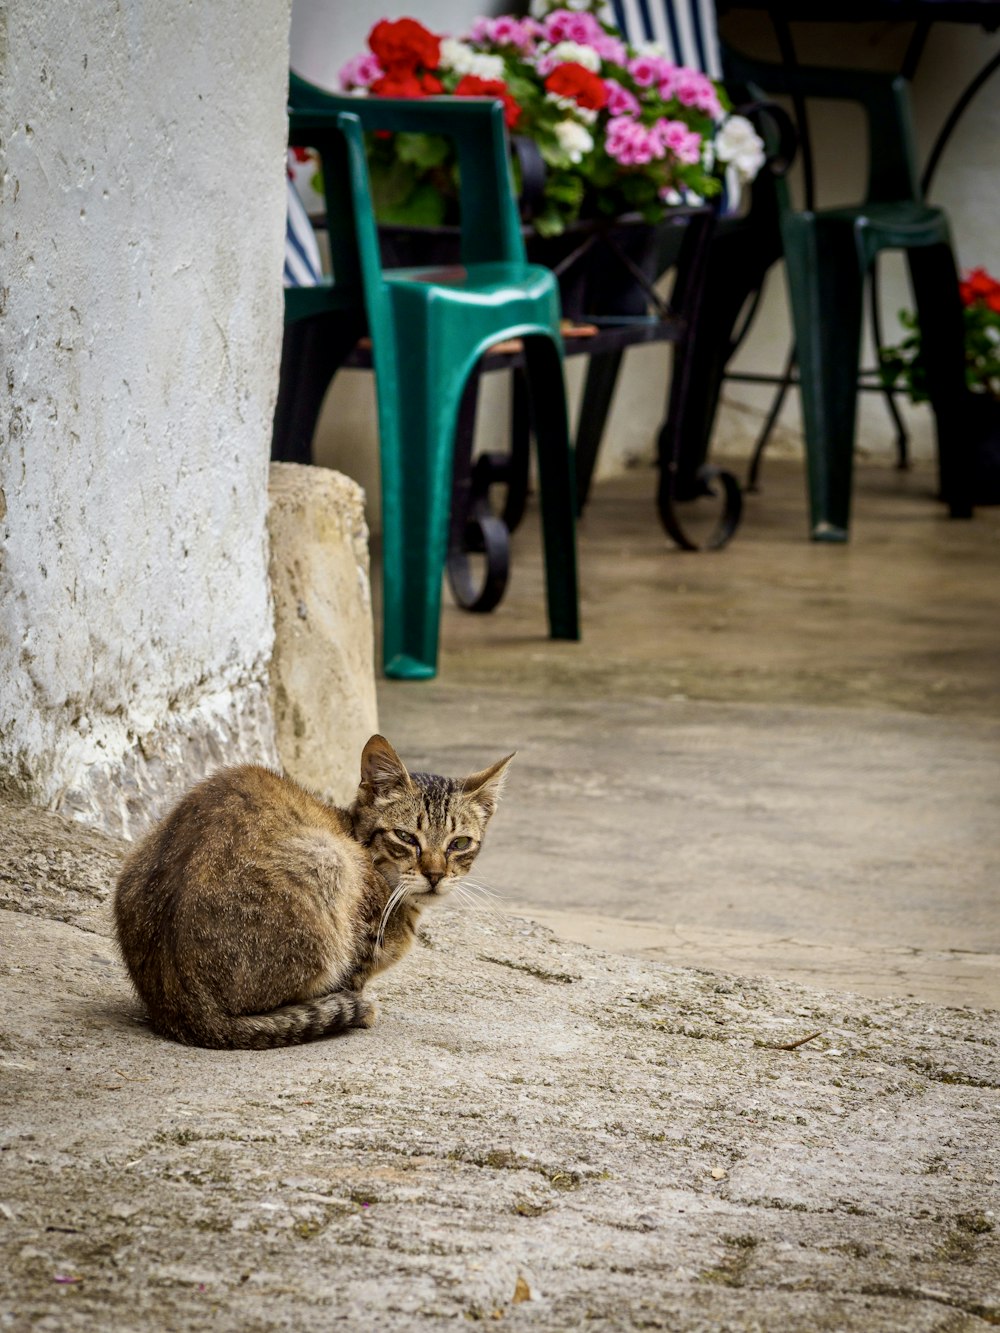 a cat sitting on the ground next to a chair